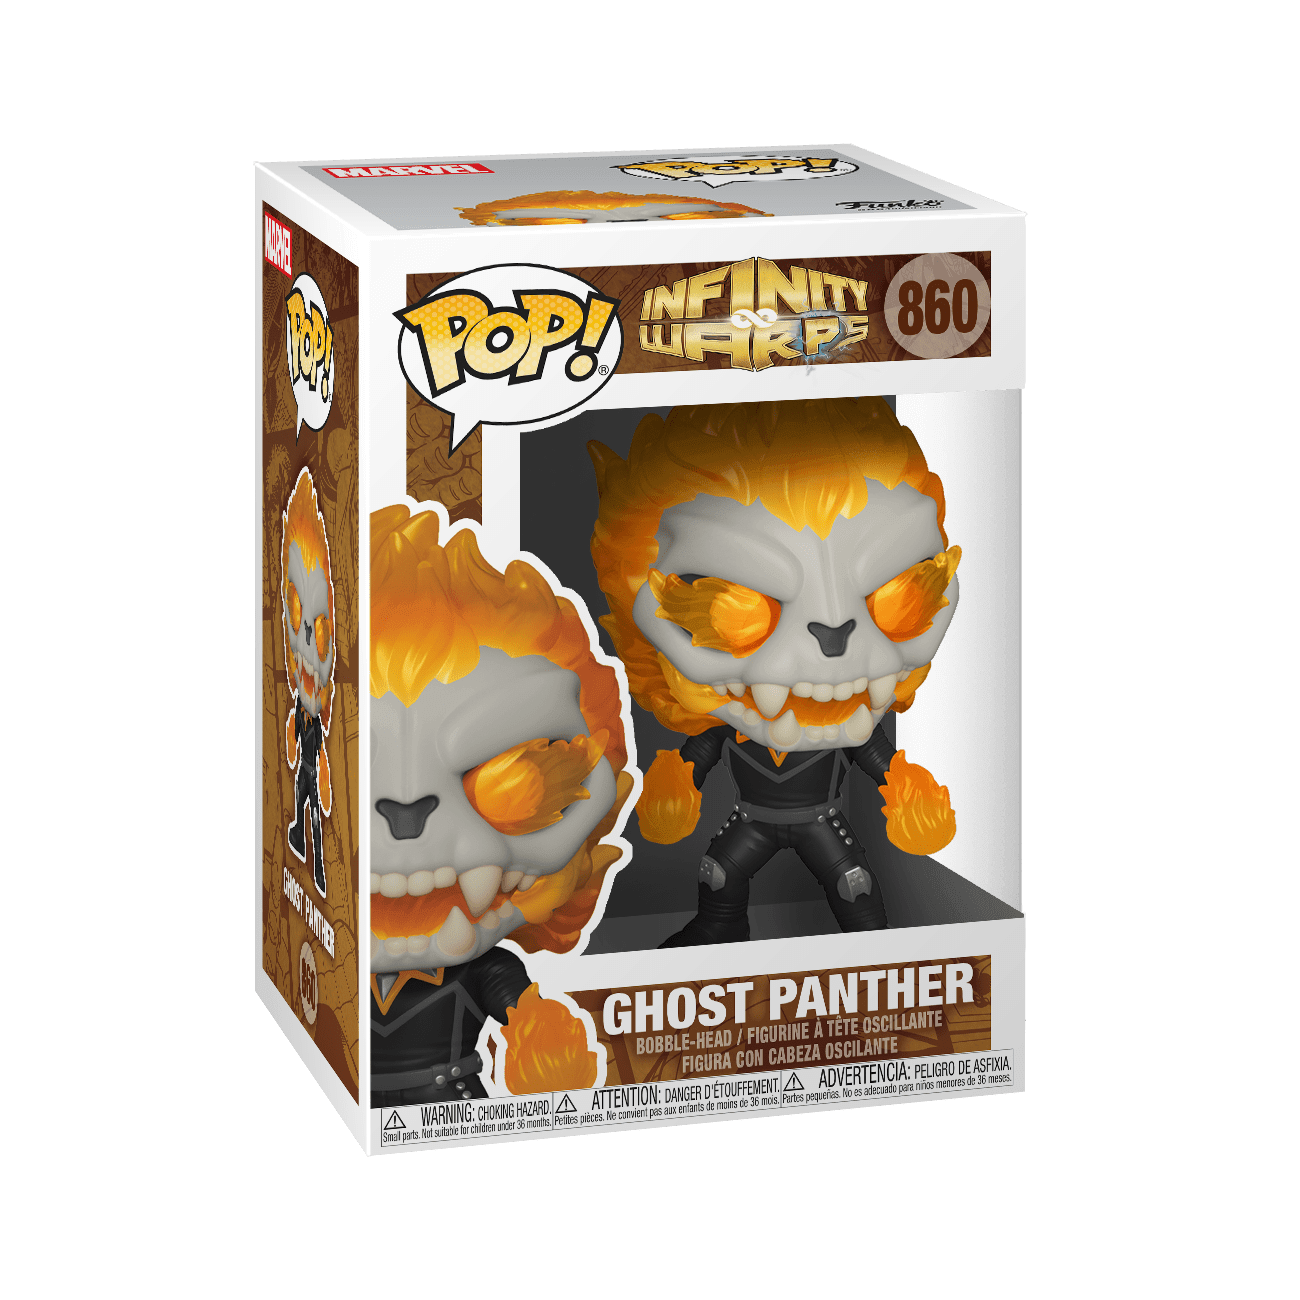 Pop! Marvel - Infinity Warps - Ghost Panther - #860 - Hobby Champion Inc